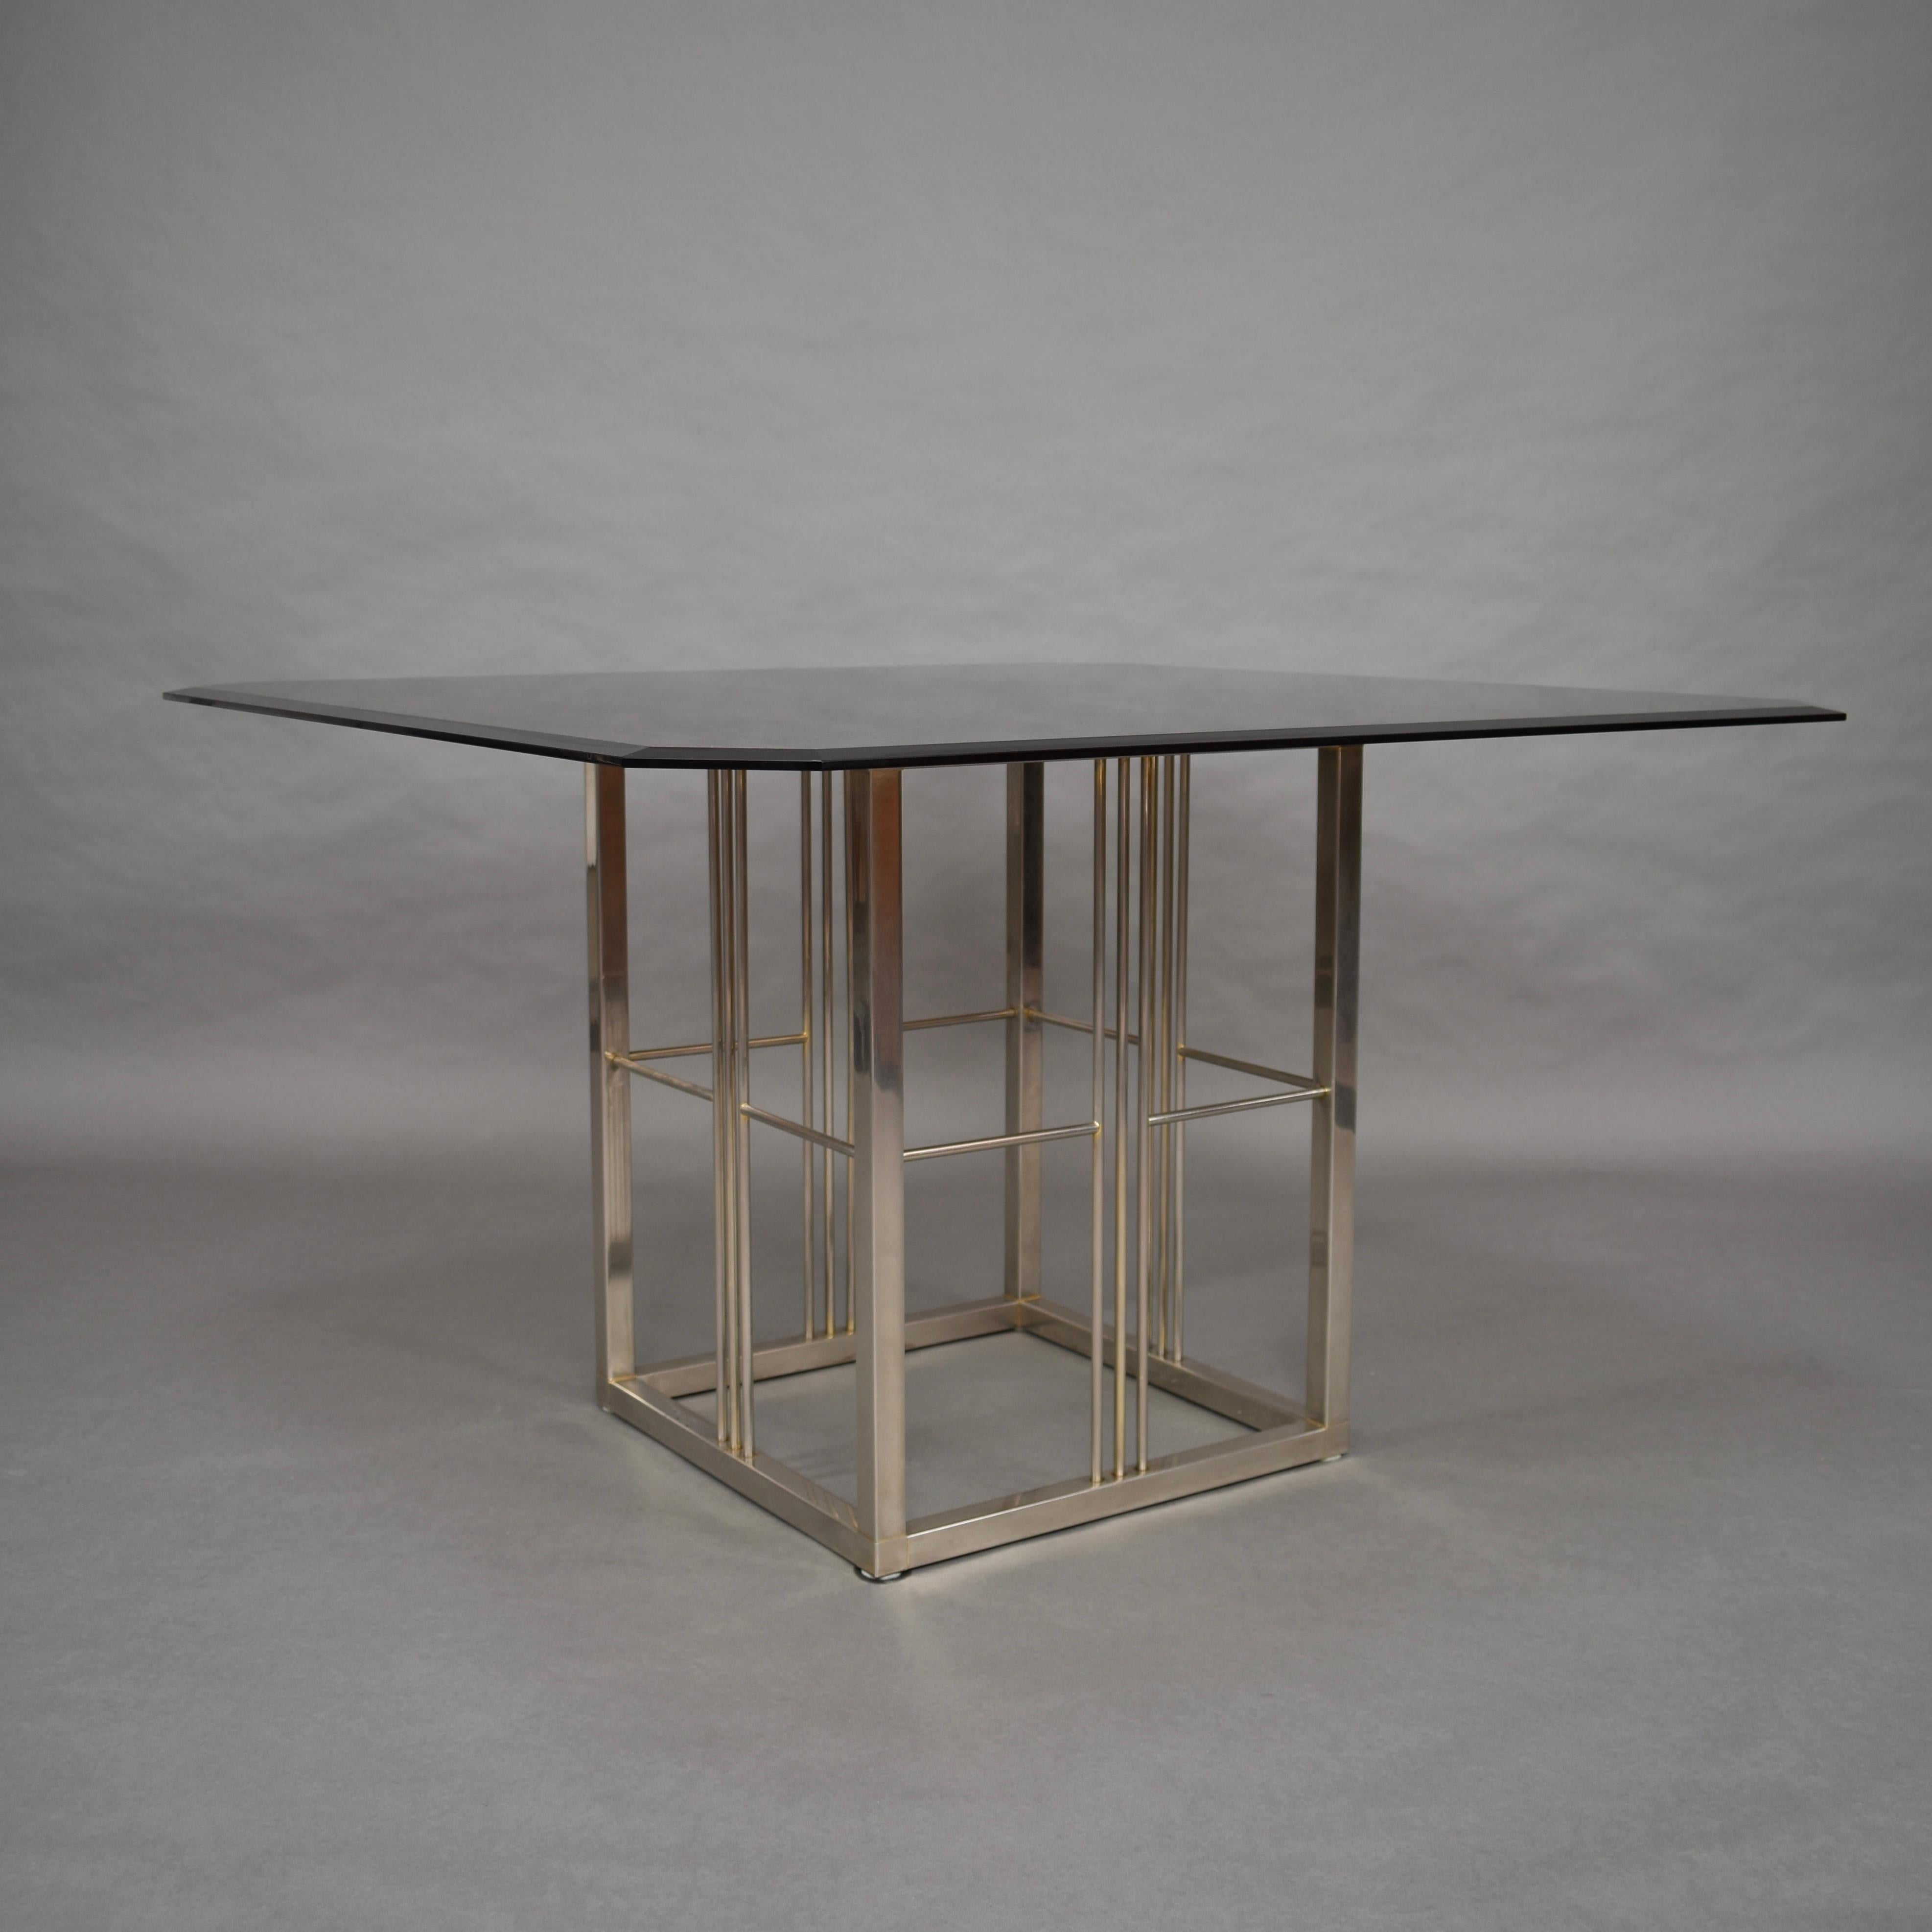 Seventies dining table in the style of Pierre Cardin. Originally the base was covered in gold leaf but that has almost all faded away. The top is made of brown smoked glass of heavy quality with cut corners.
The table is probably of Italian,